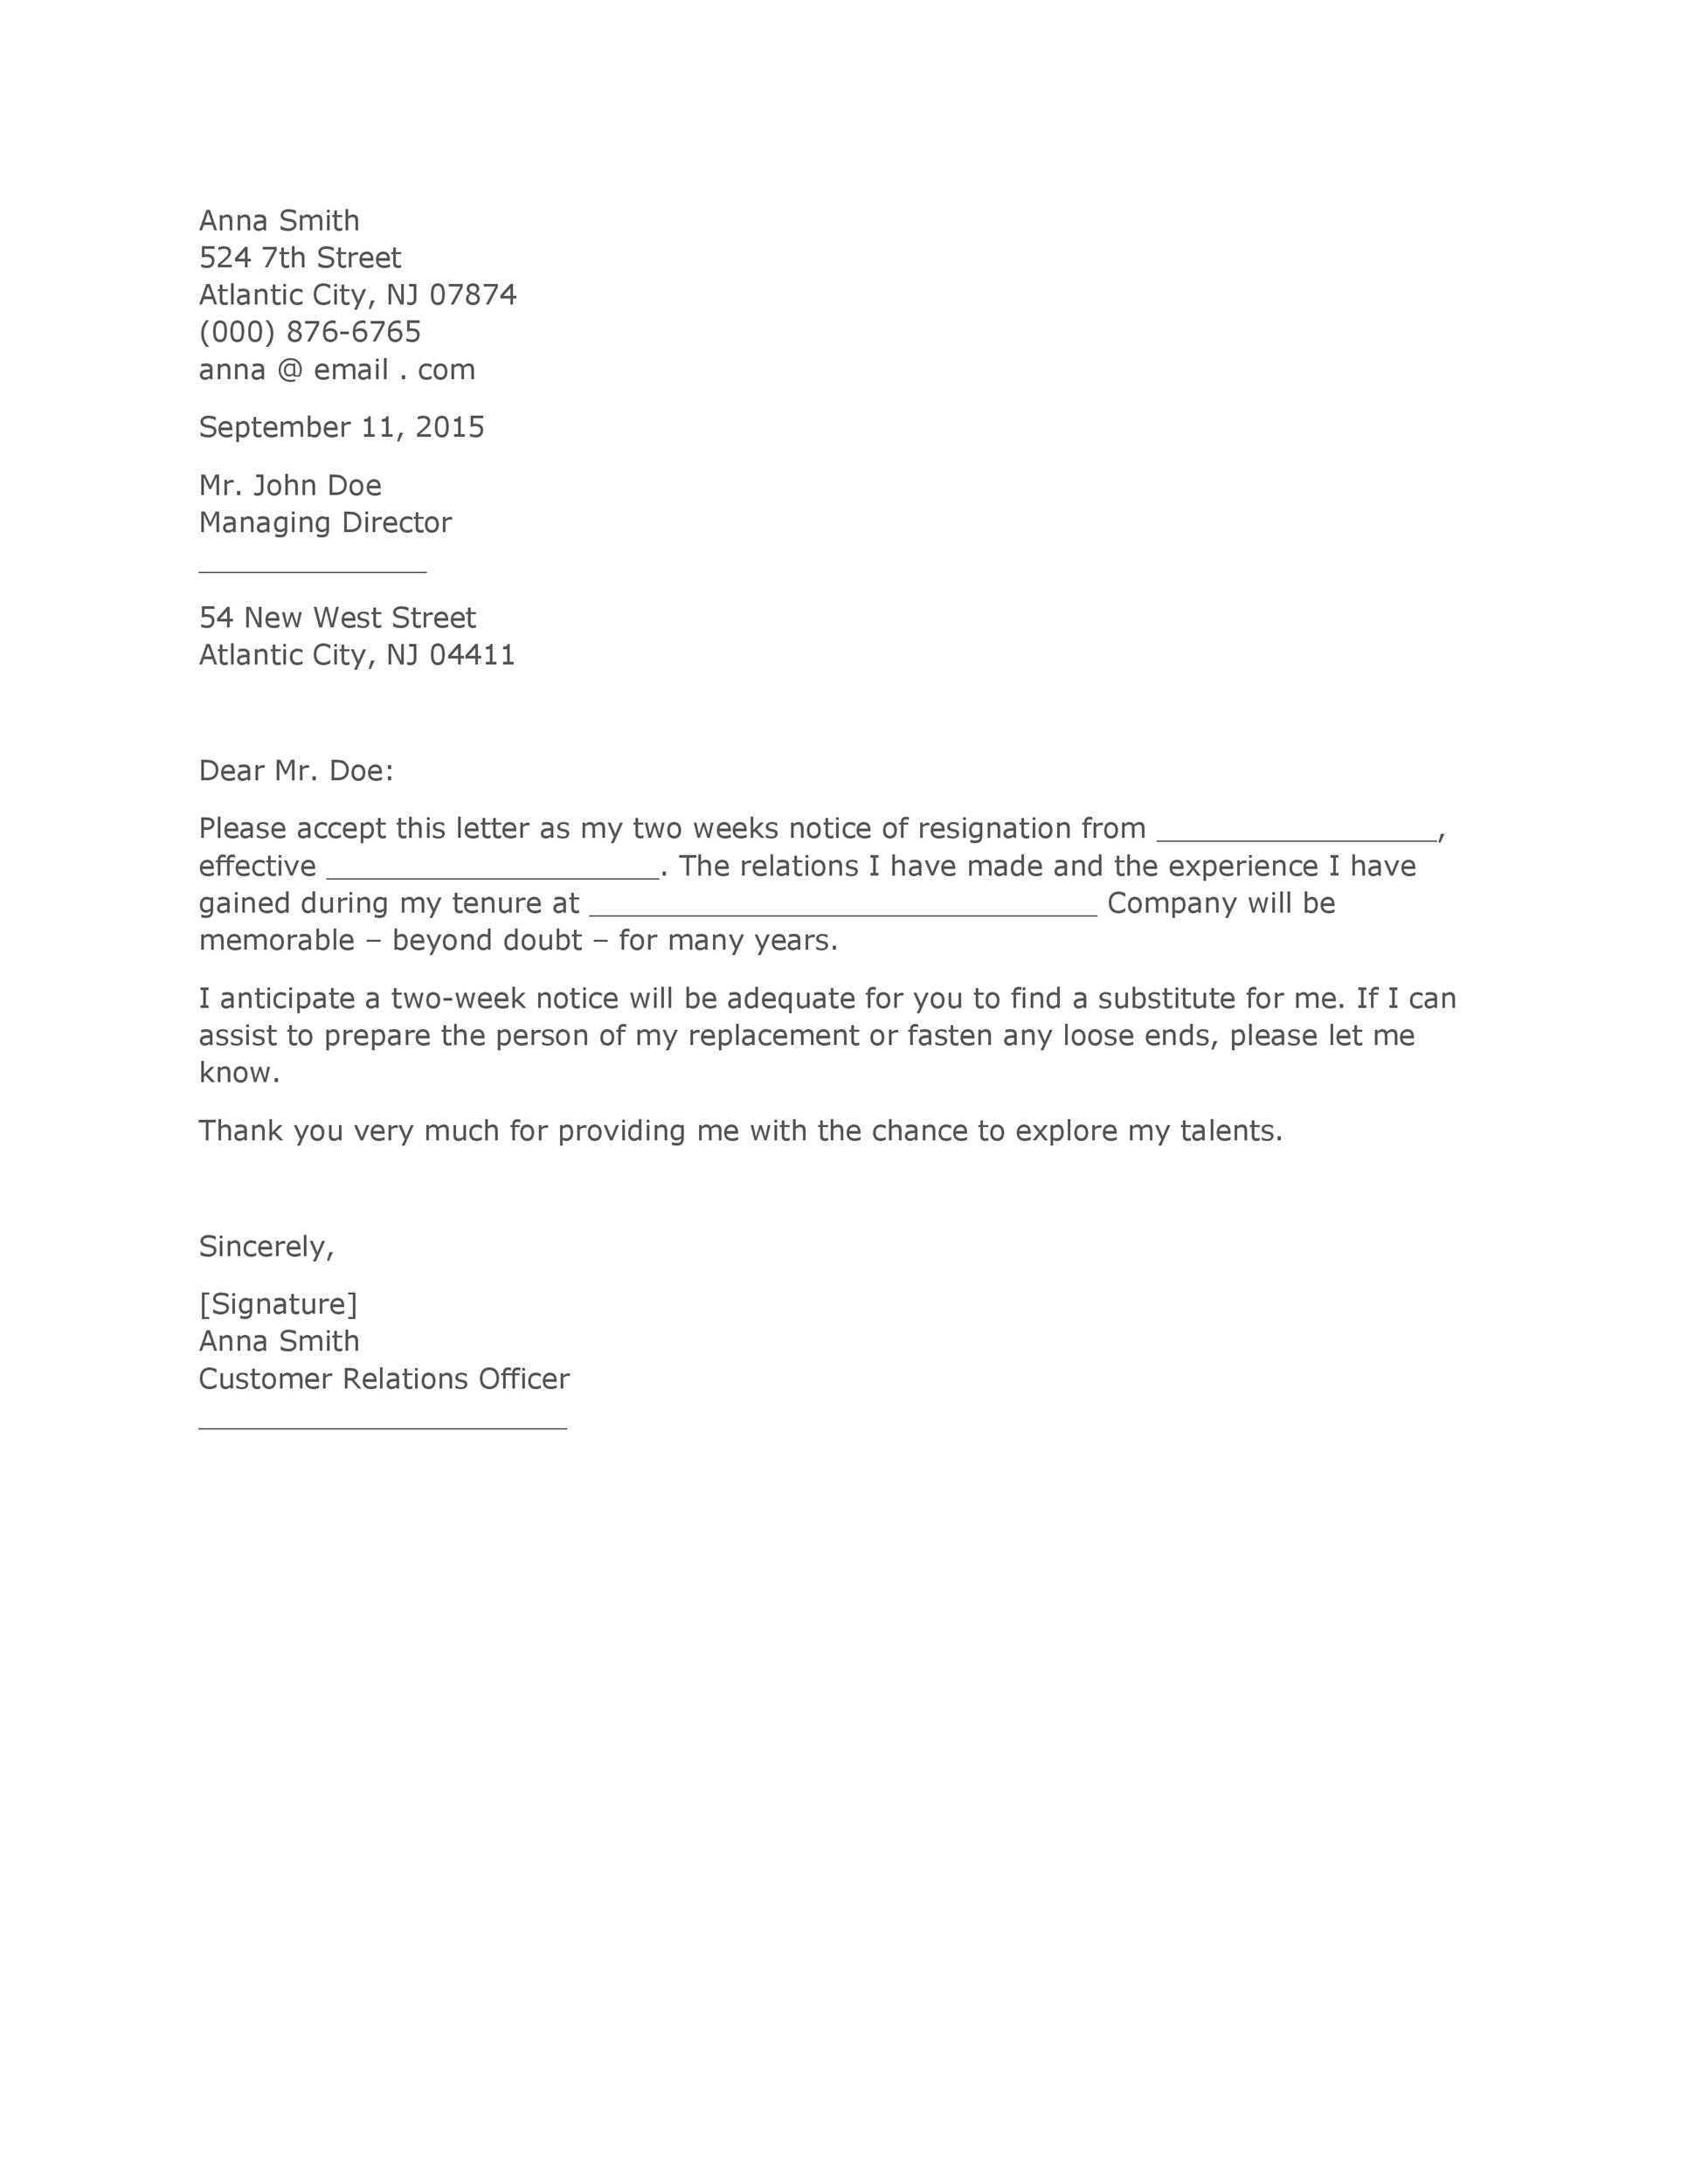 33+ Two Weeks Notice Letter Templates – PDF, DOC